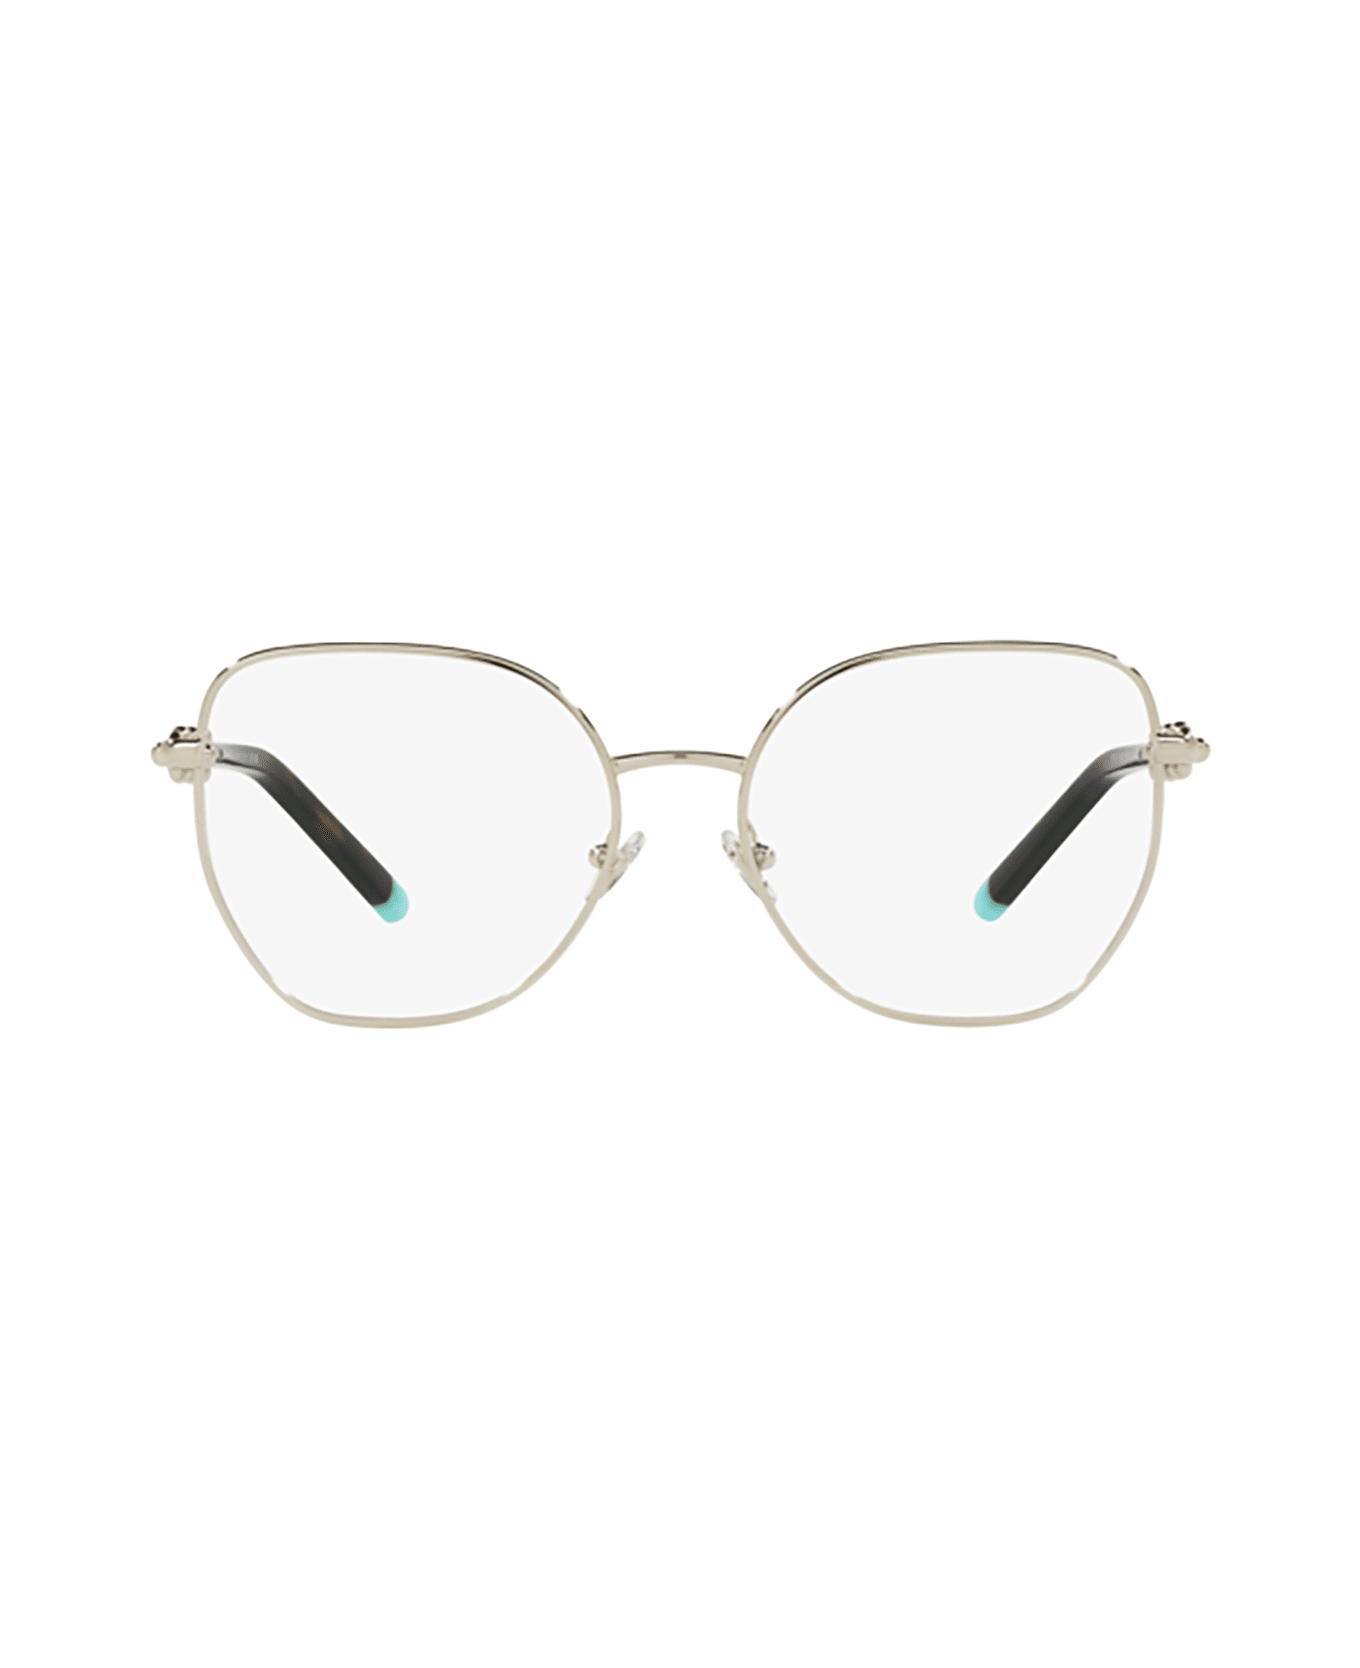 Tiffany & Co. Tf1147 Pale Gold Glasses - Pale Gold